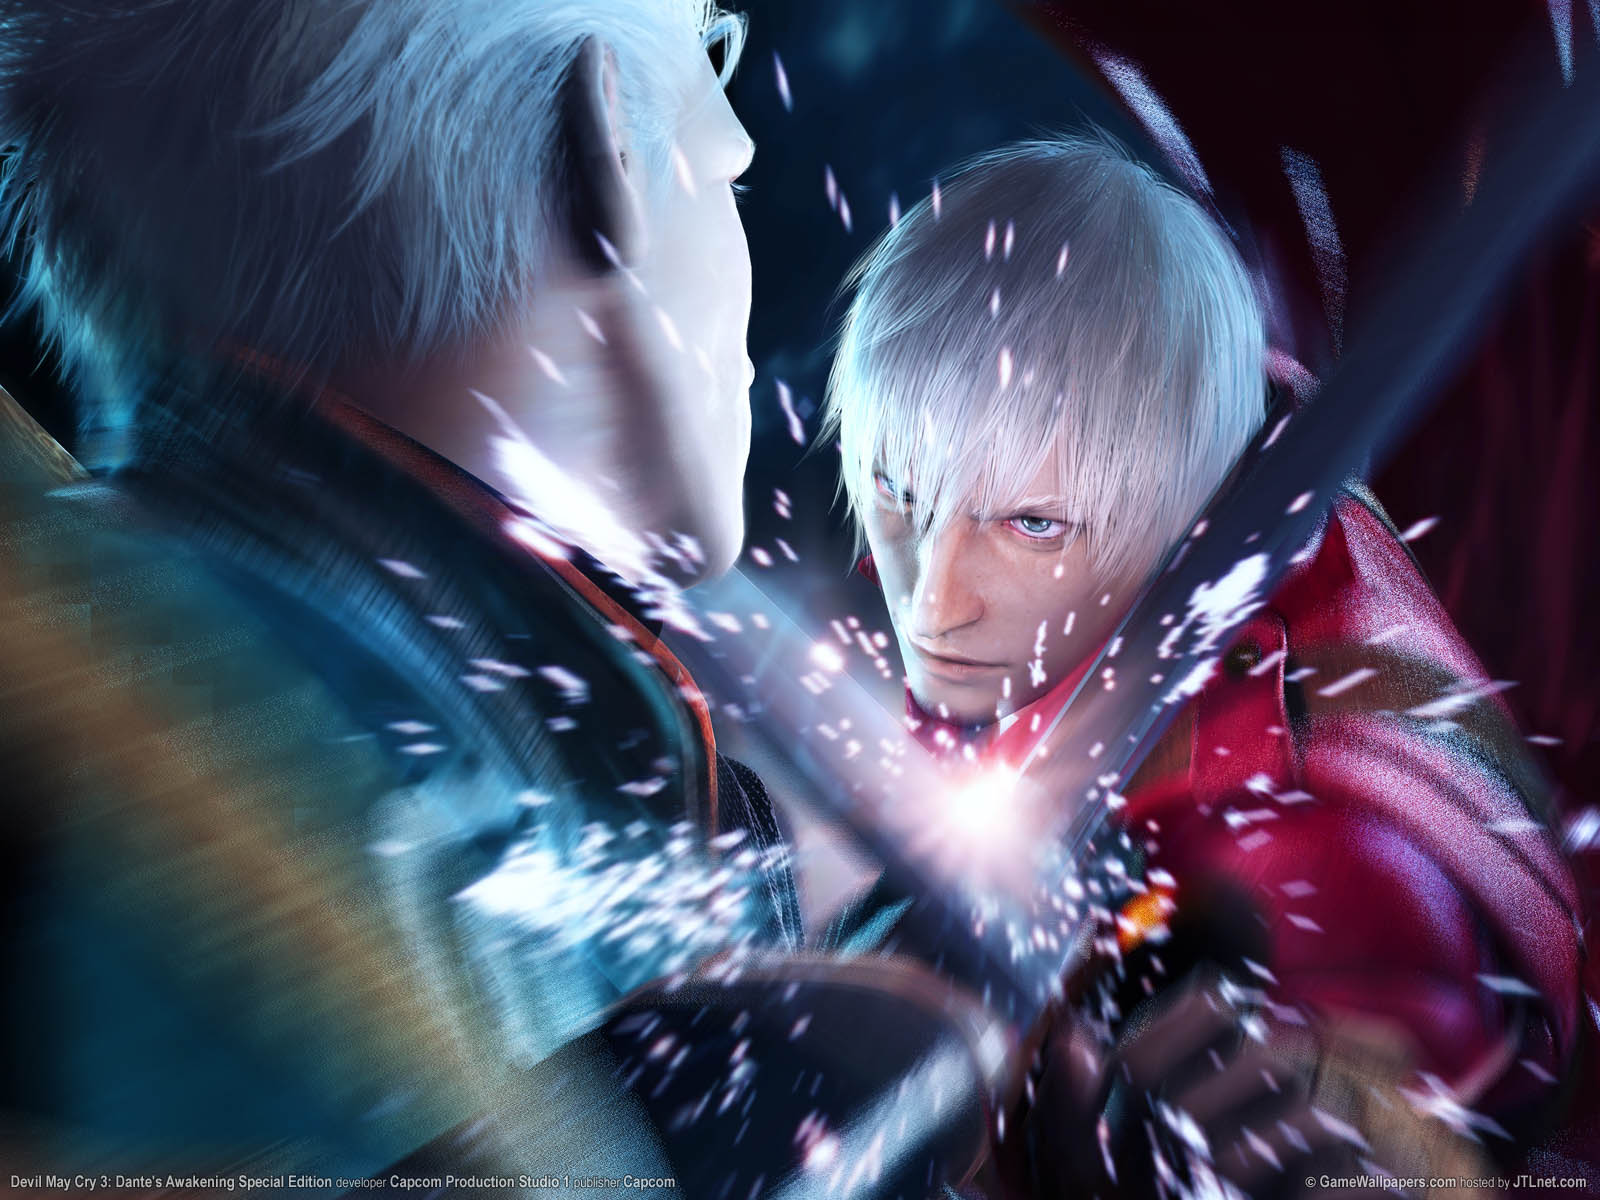 vergil (devil may cry), devil may cry, video game, devil may cry 3: dante's awakening, dante (devil may cry)